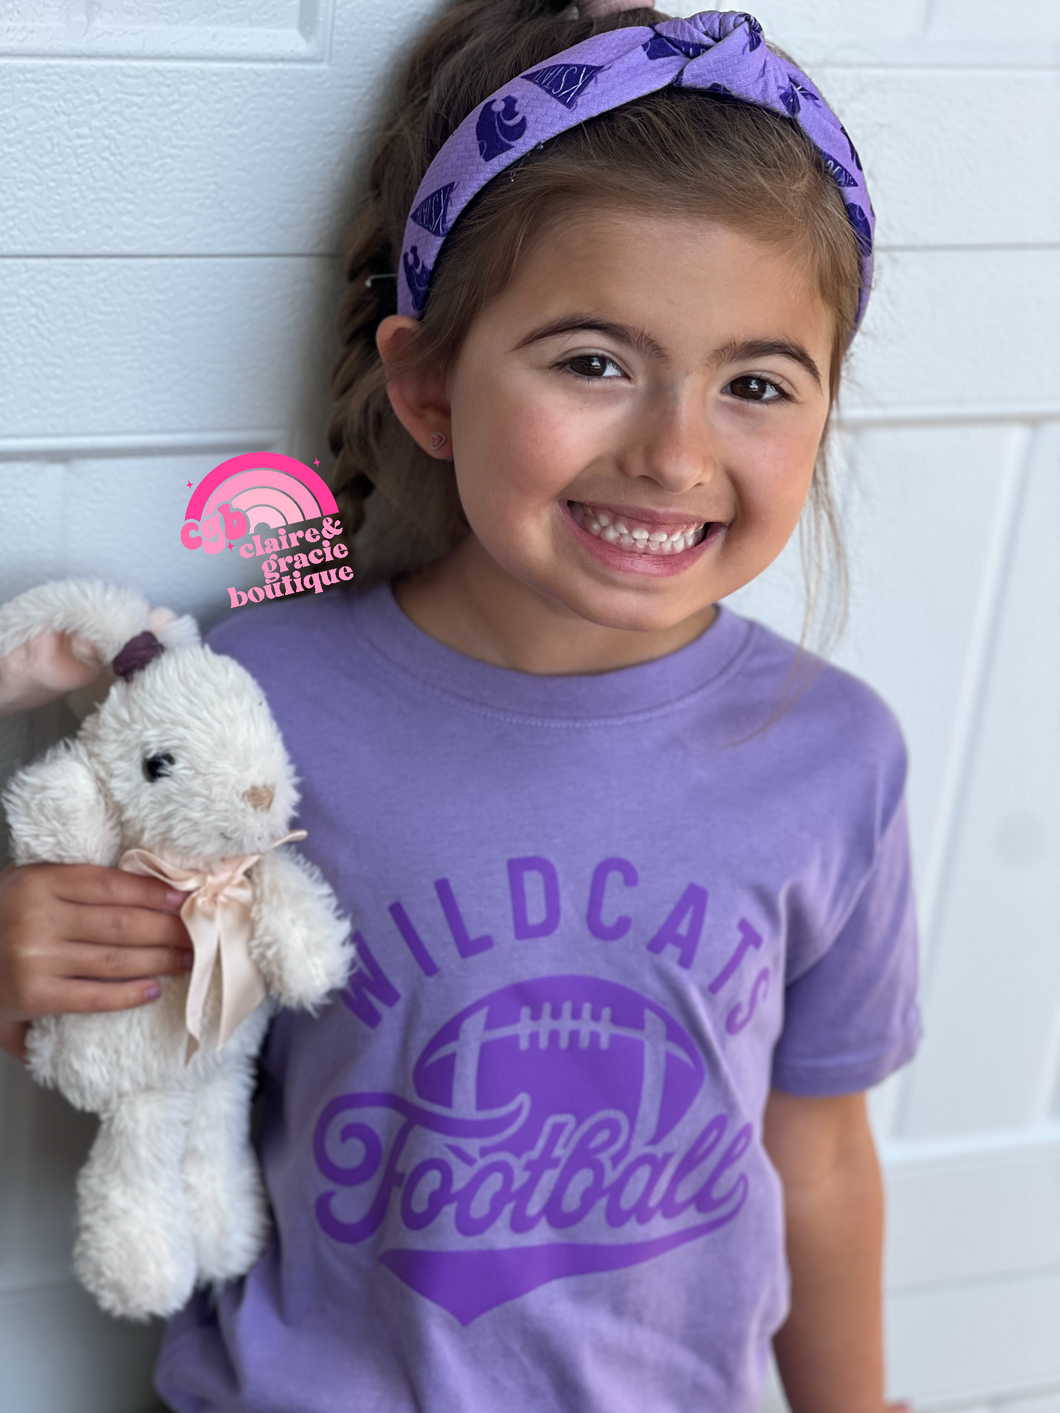 Wildcats Football Tee | Toddler Youth Adult Sizes